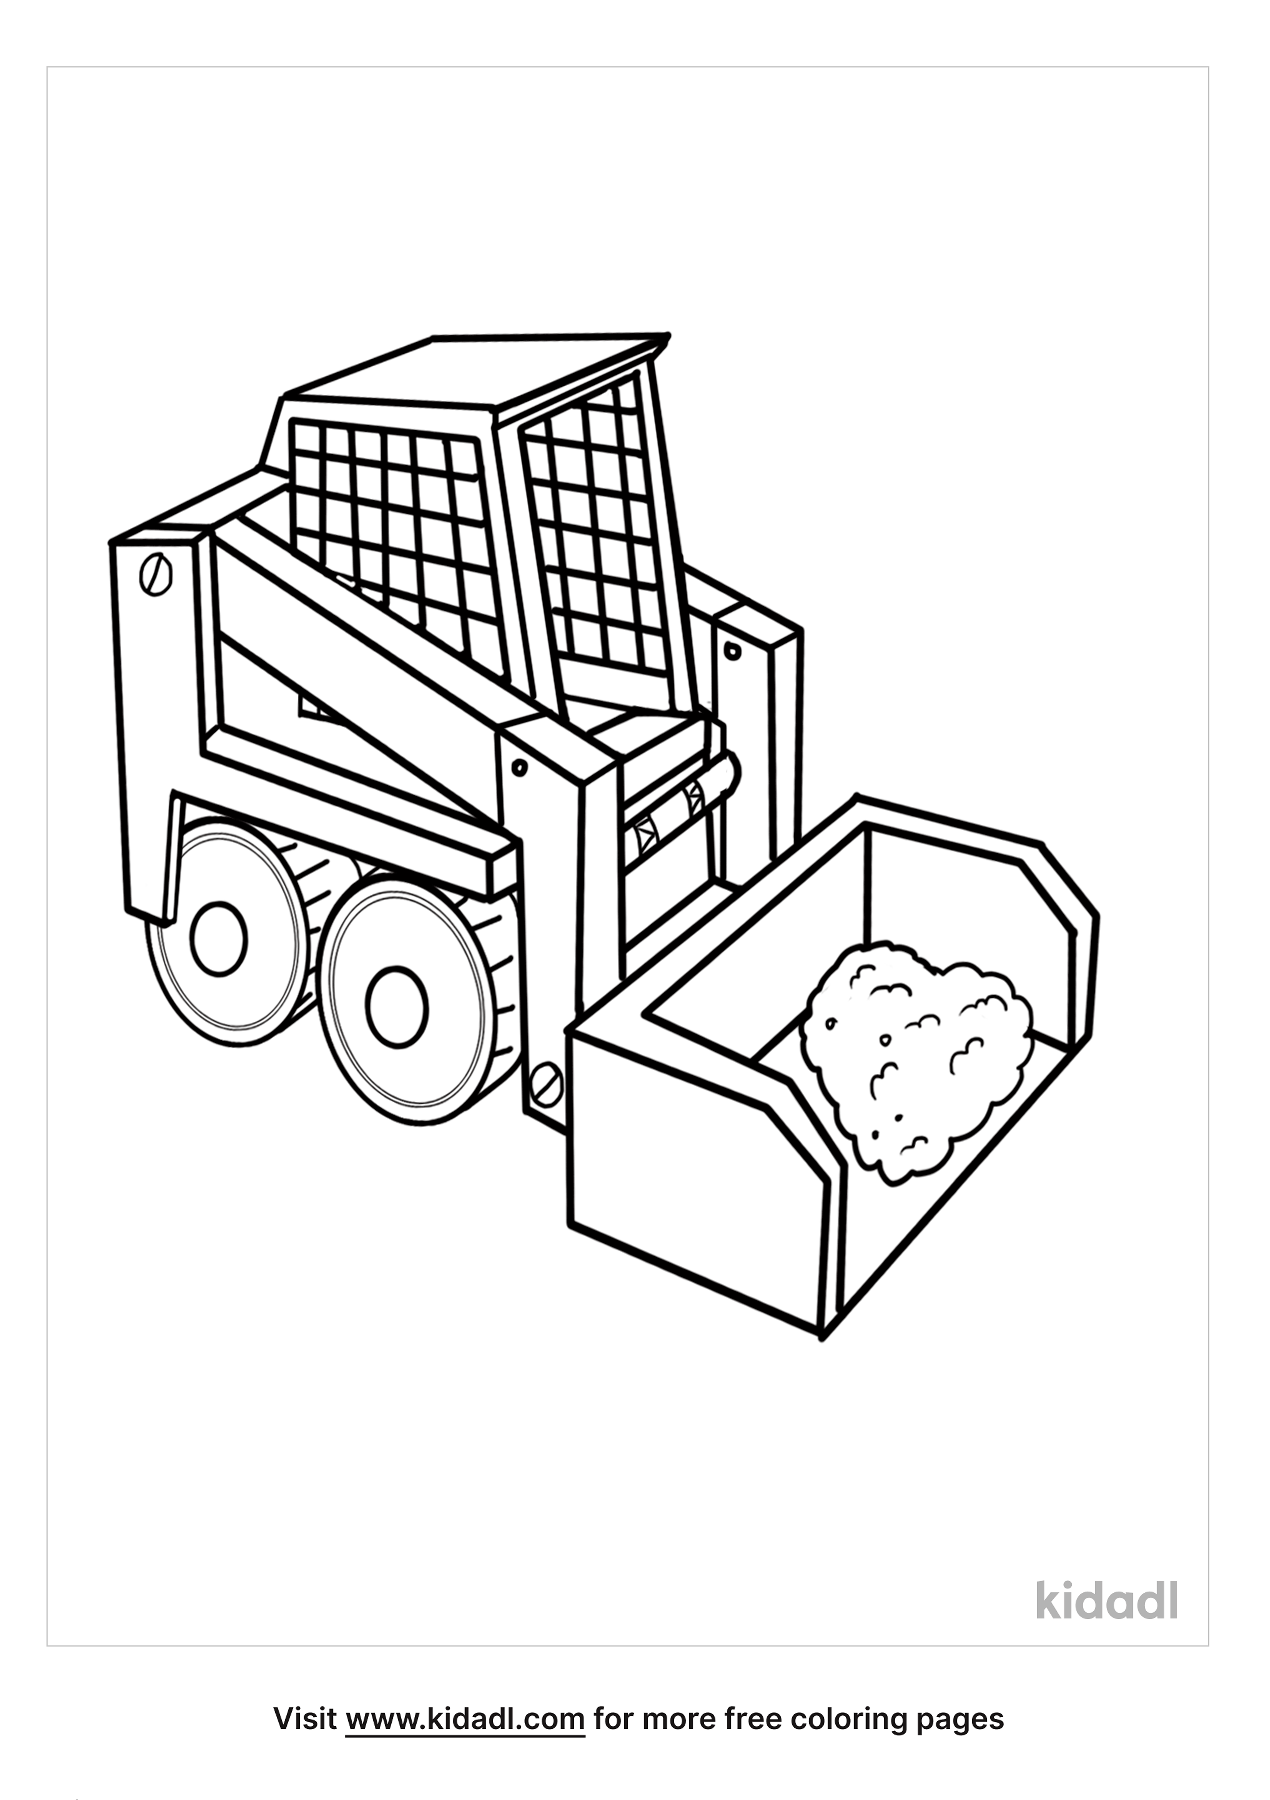 Skid Steer Coloring Pages | Free Vehicles Coloring Pages | Kidadl